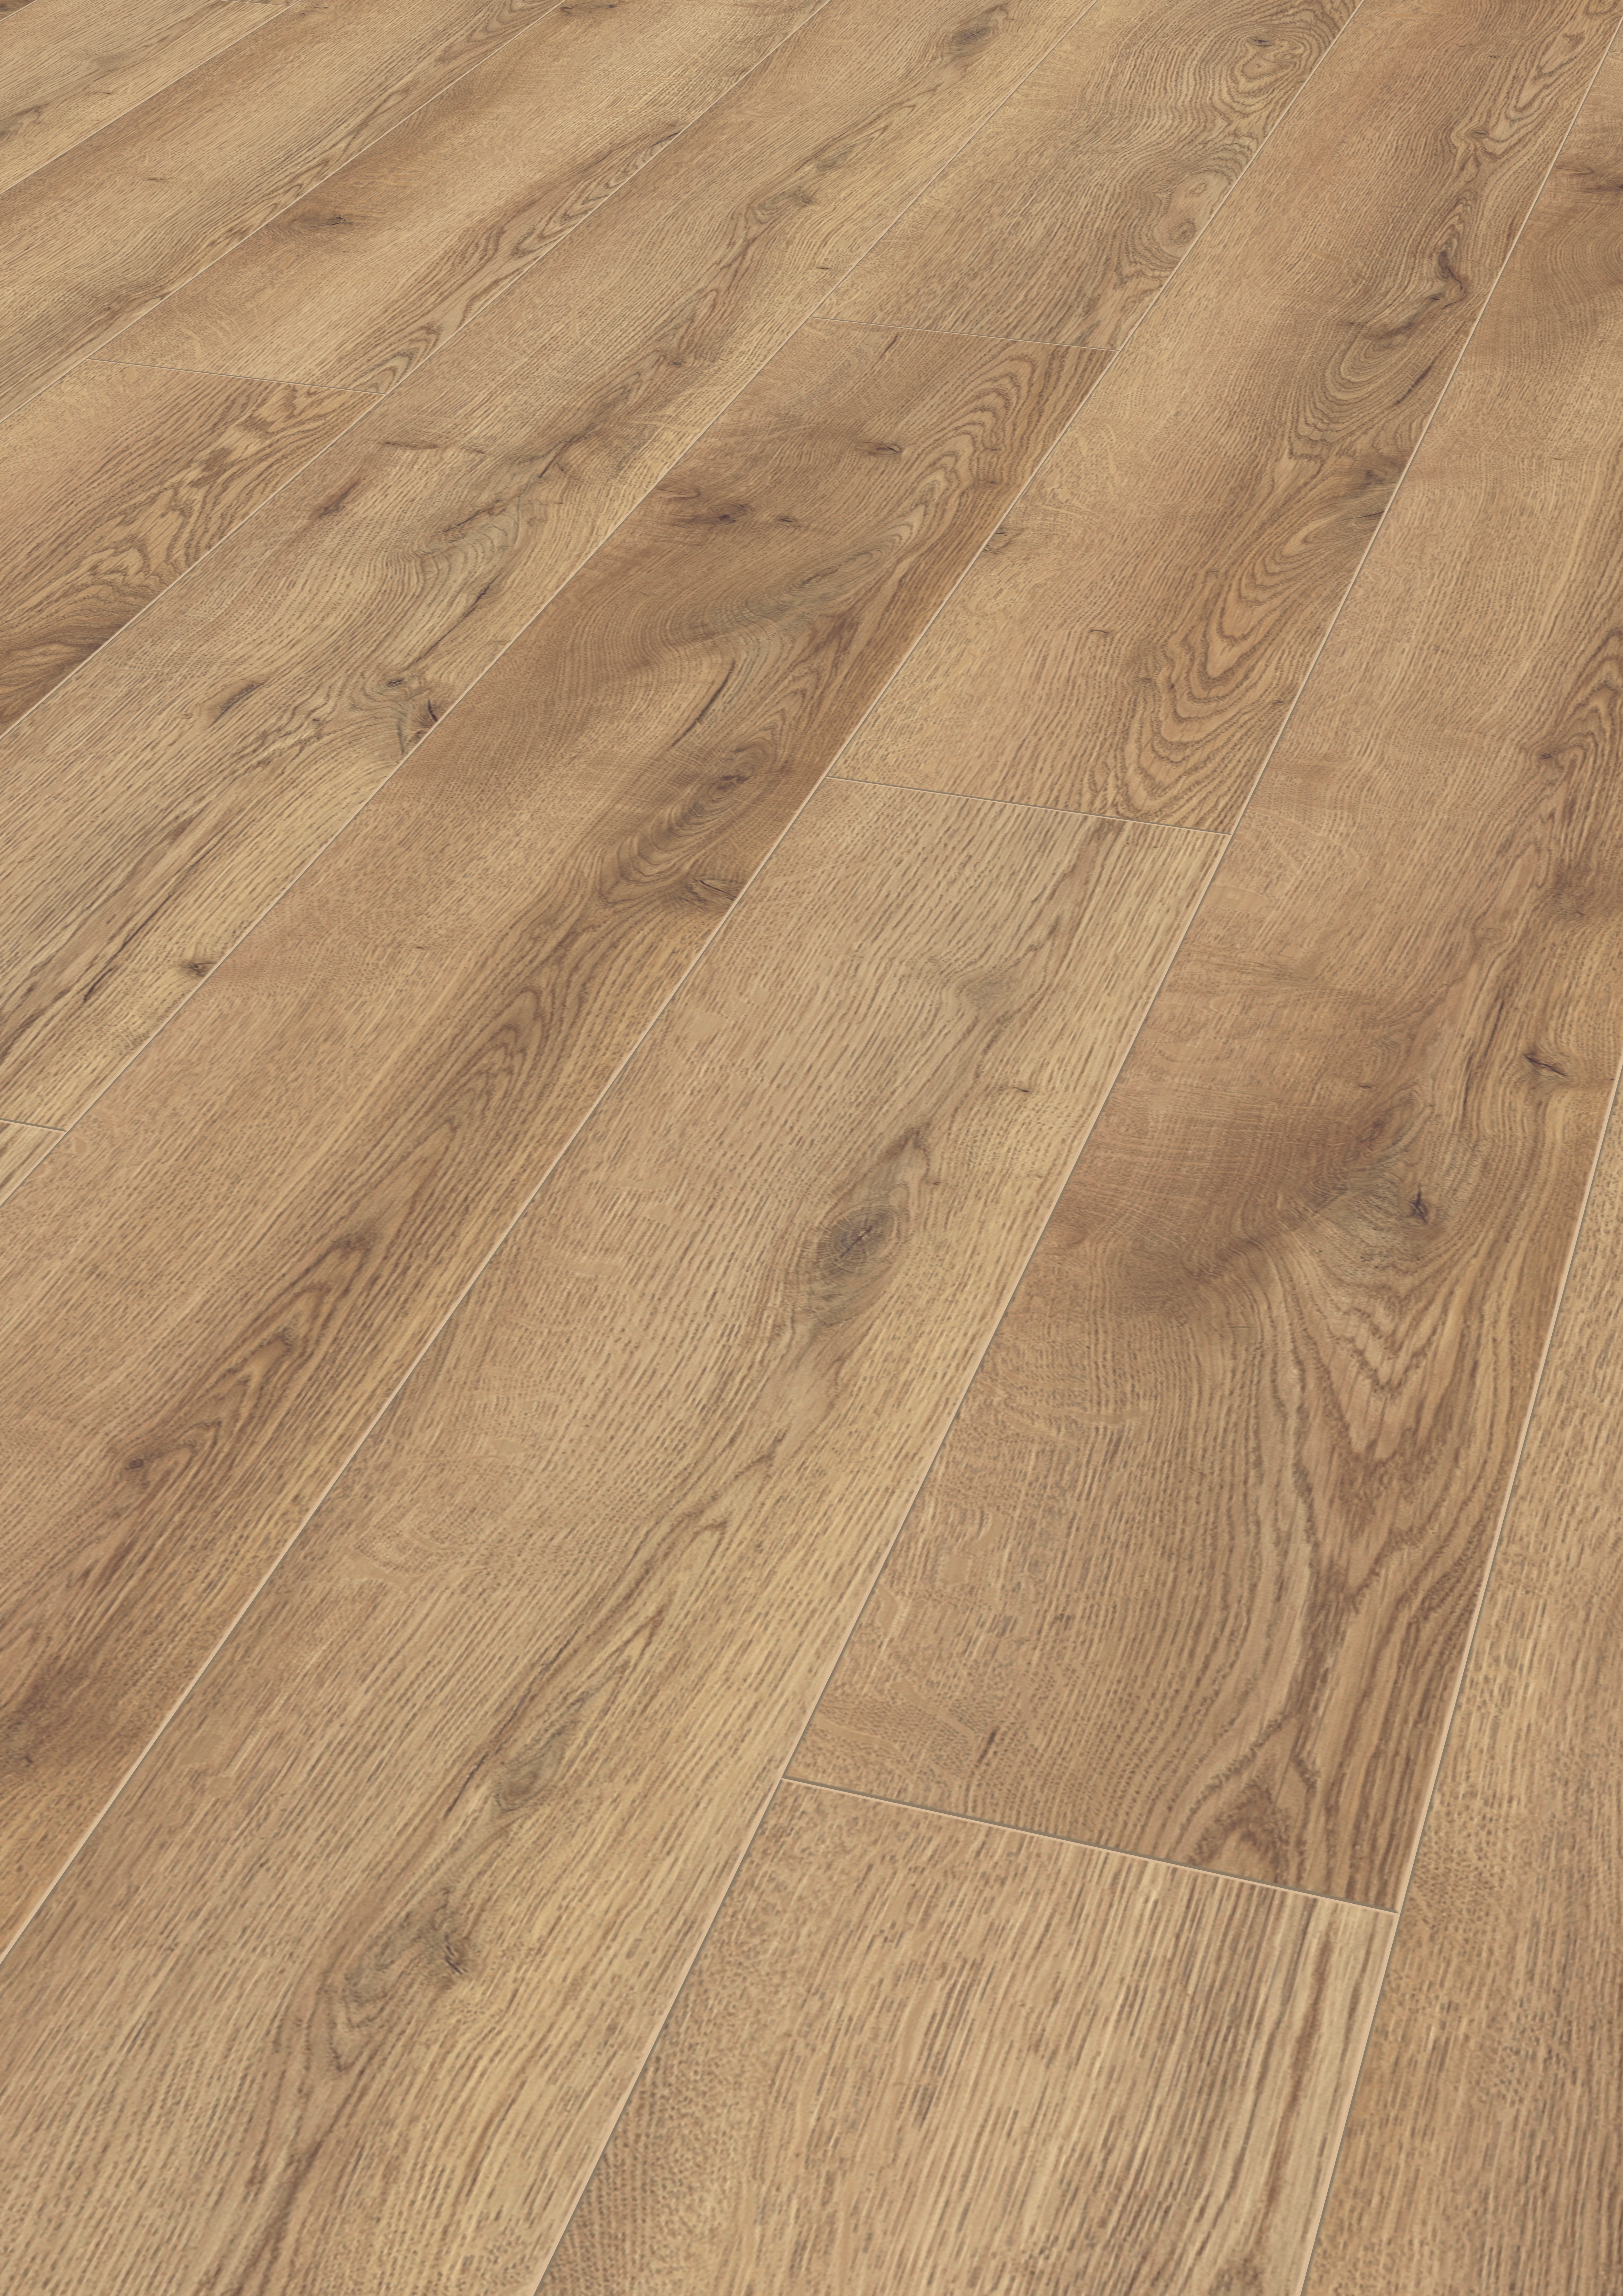 30 Stunning Hardwood Flooring tools Required 2024 free download hardwood flooring tools required of mammut laminate flooring in country house plank style kronotex for download picture amp